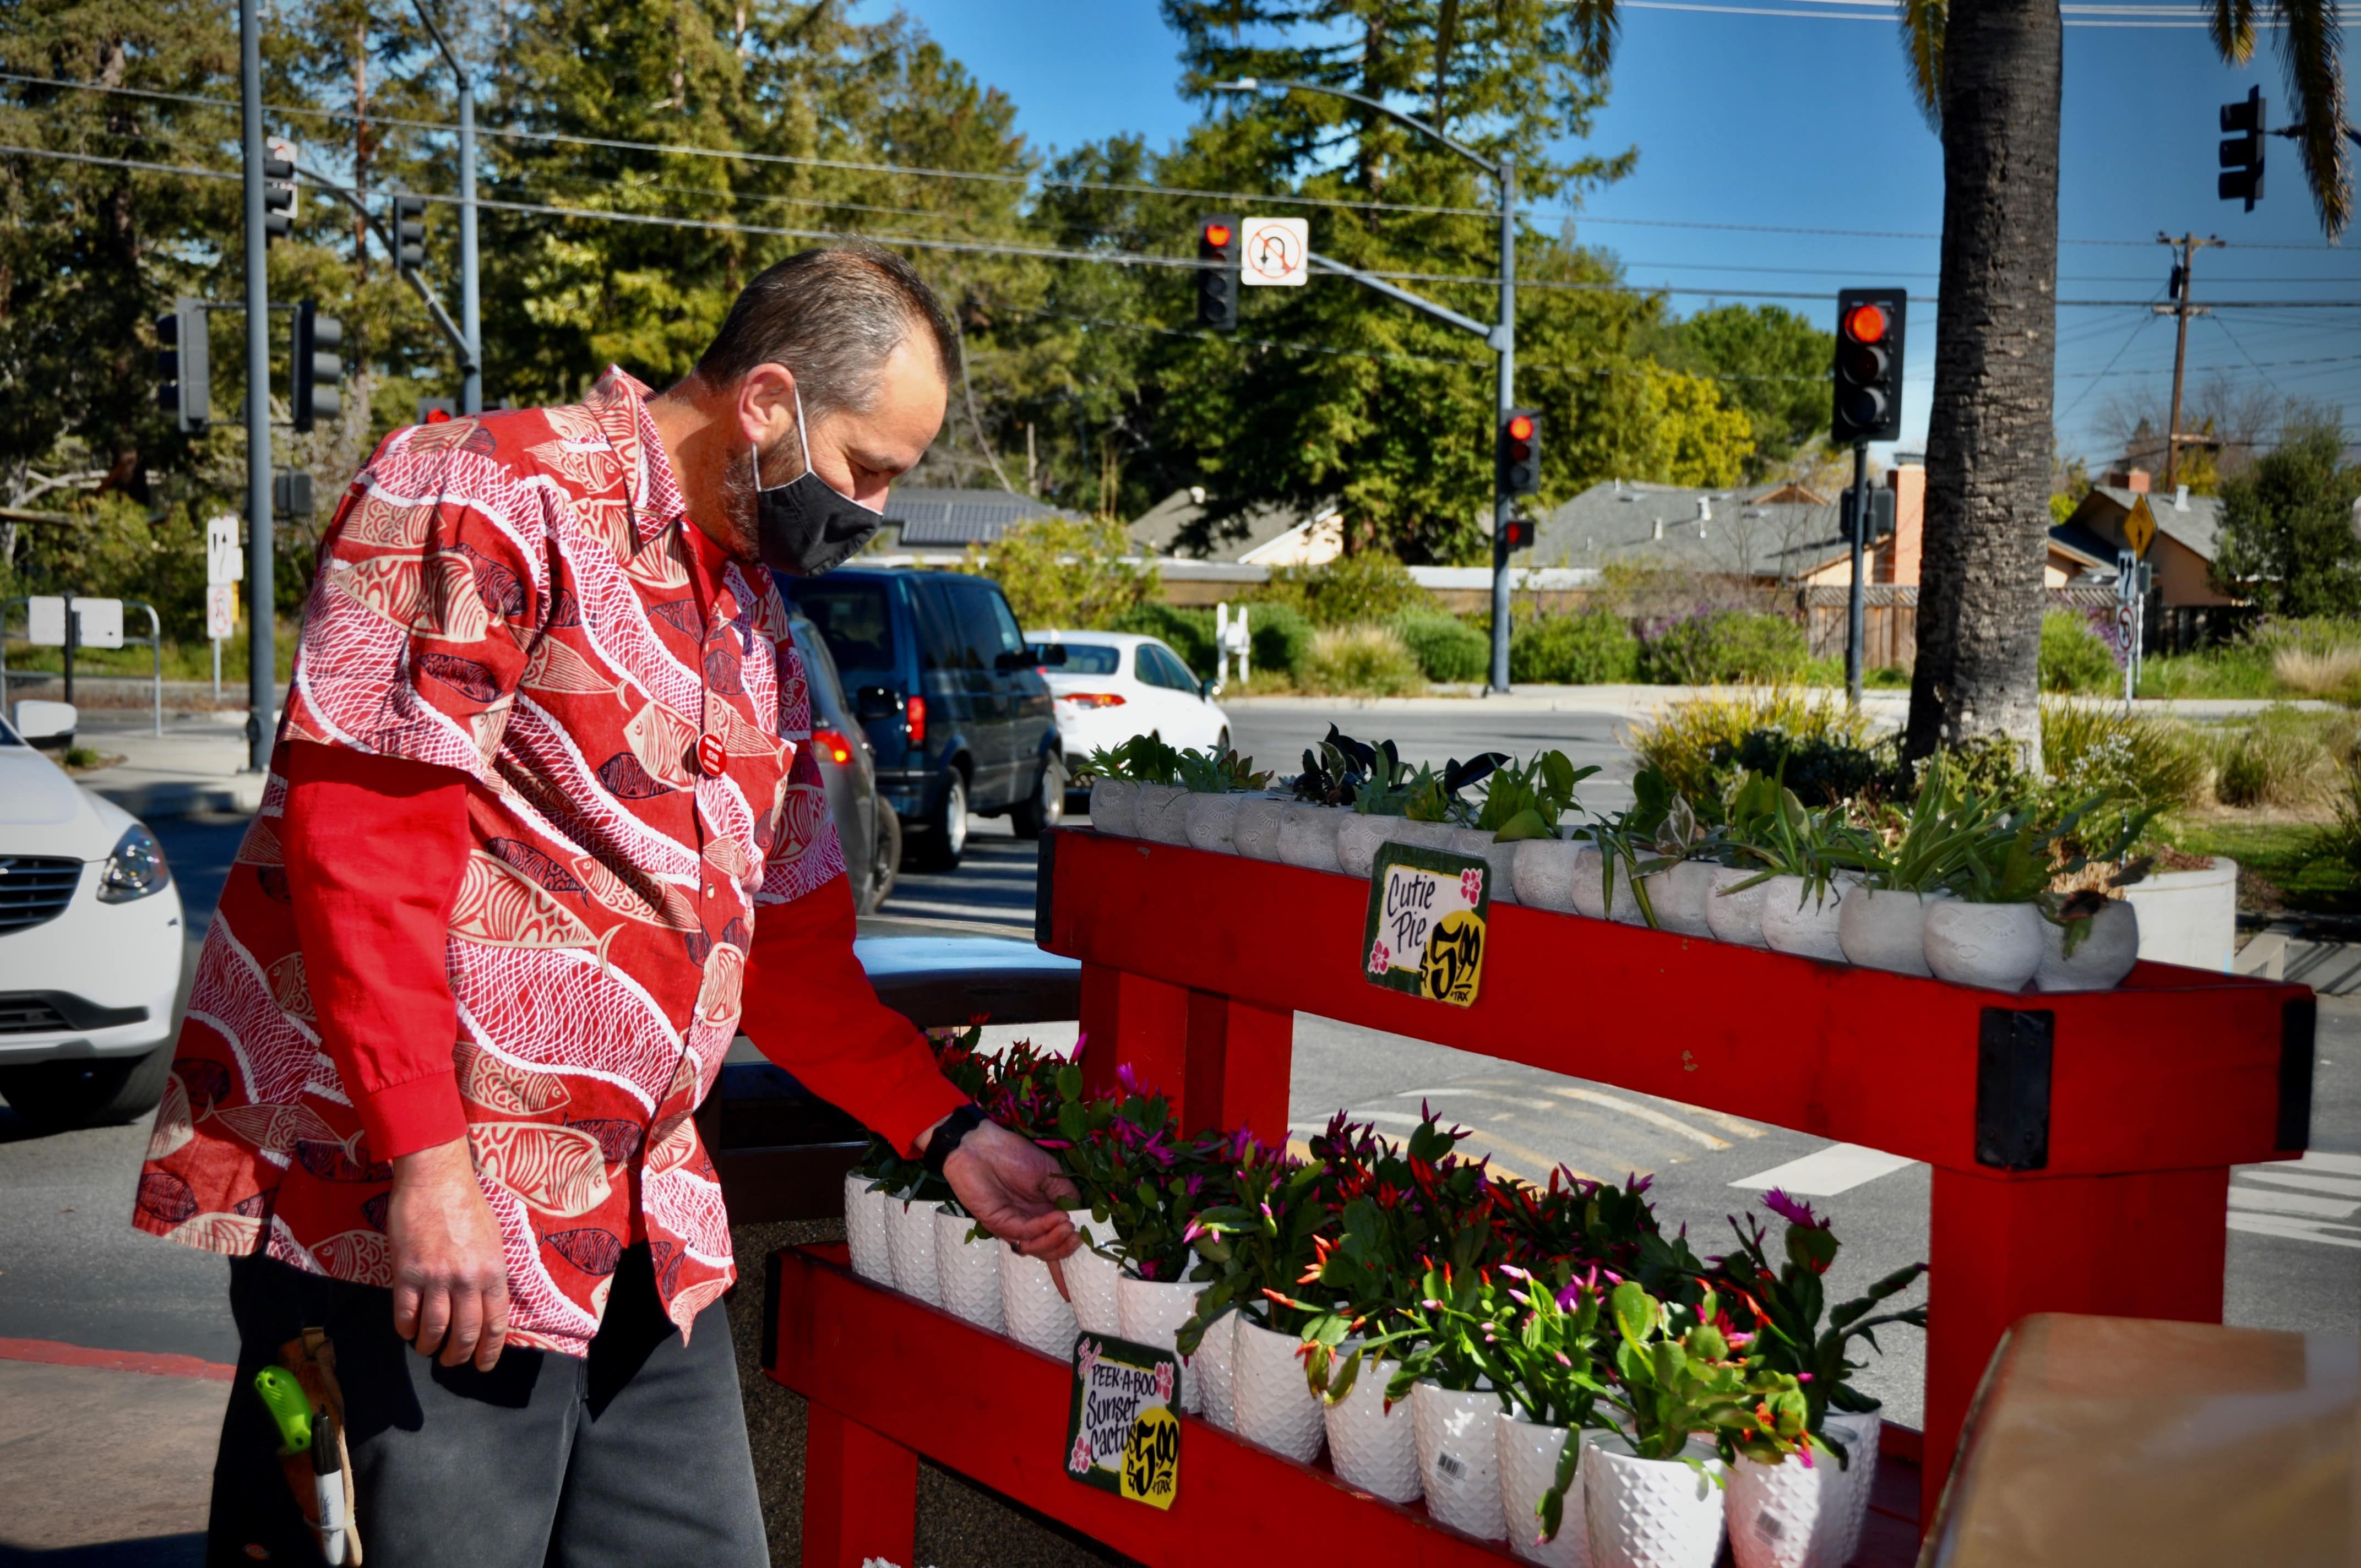 Trader Joe's Crew Member arranging the potted plant display.